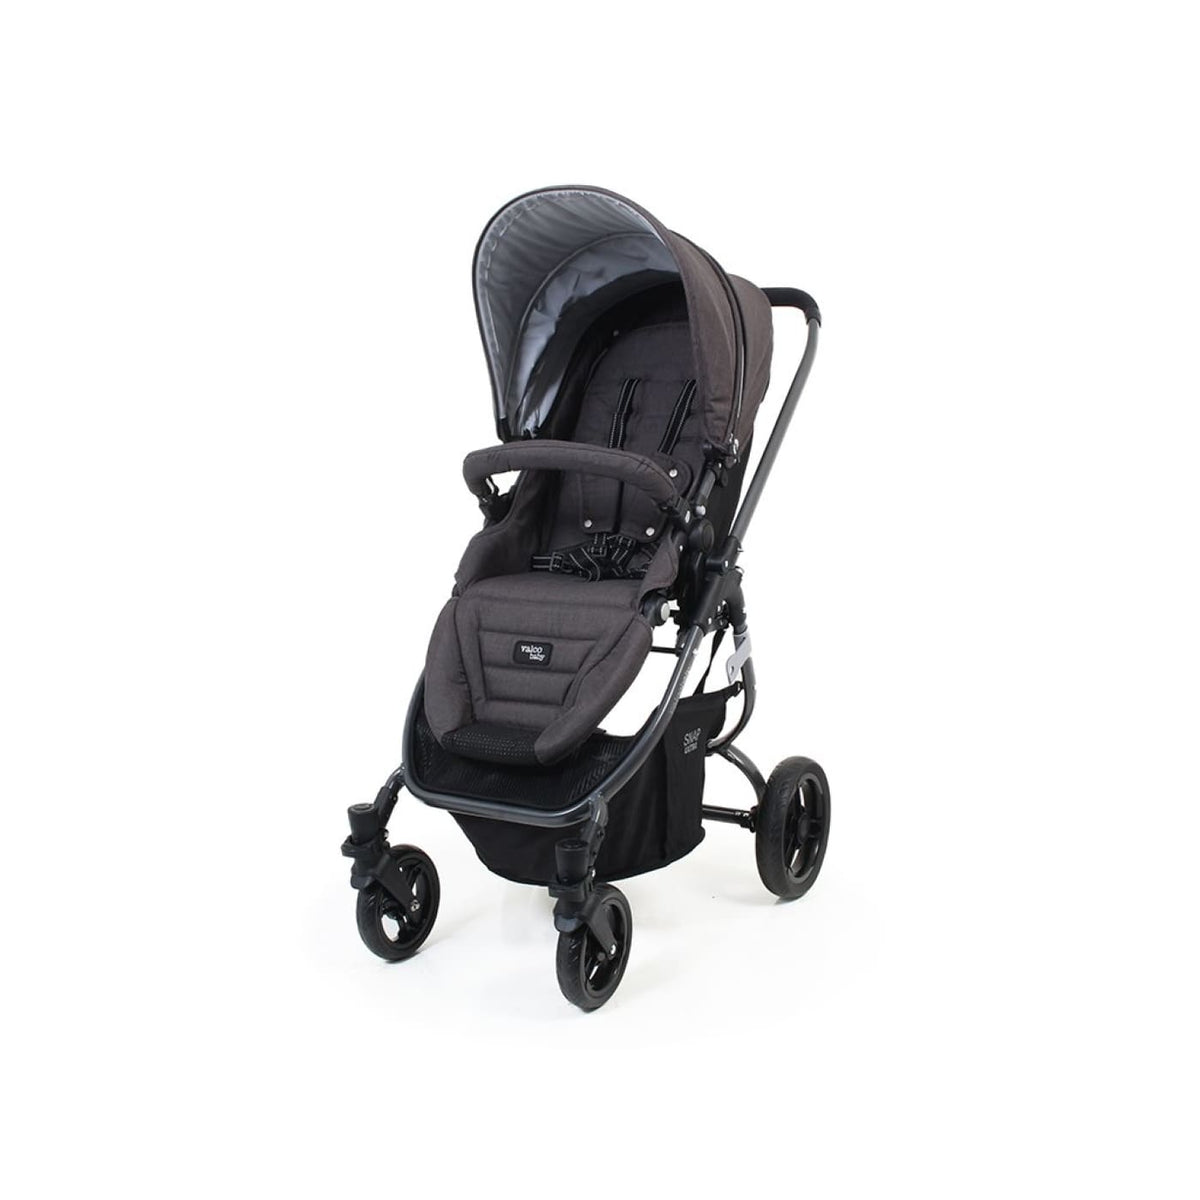 Valco Baby Snap Ultra Tailormade - Charcoal - PRAMS &amp; STROLLERS - 4 WHEEL TSC